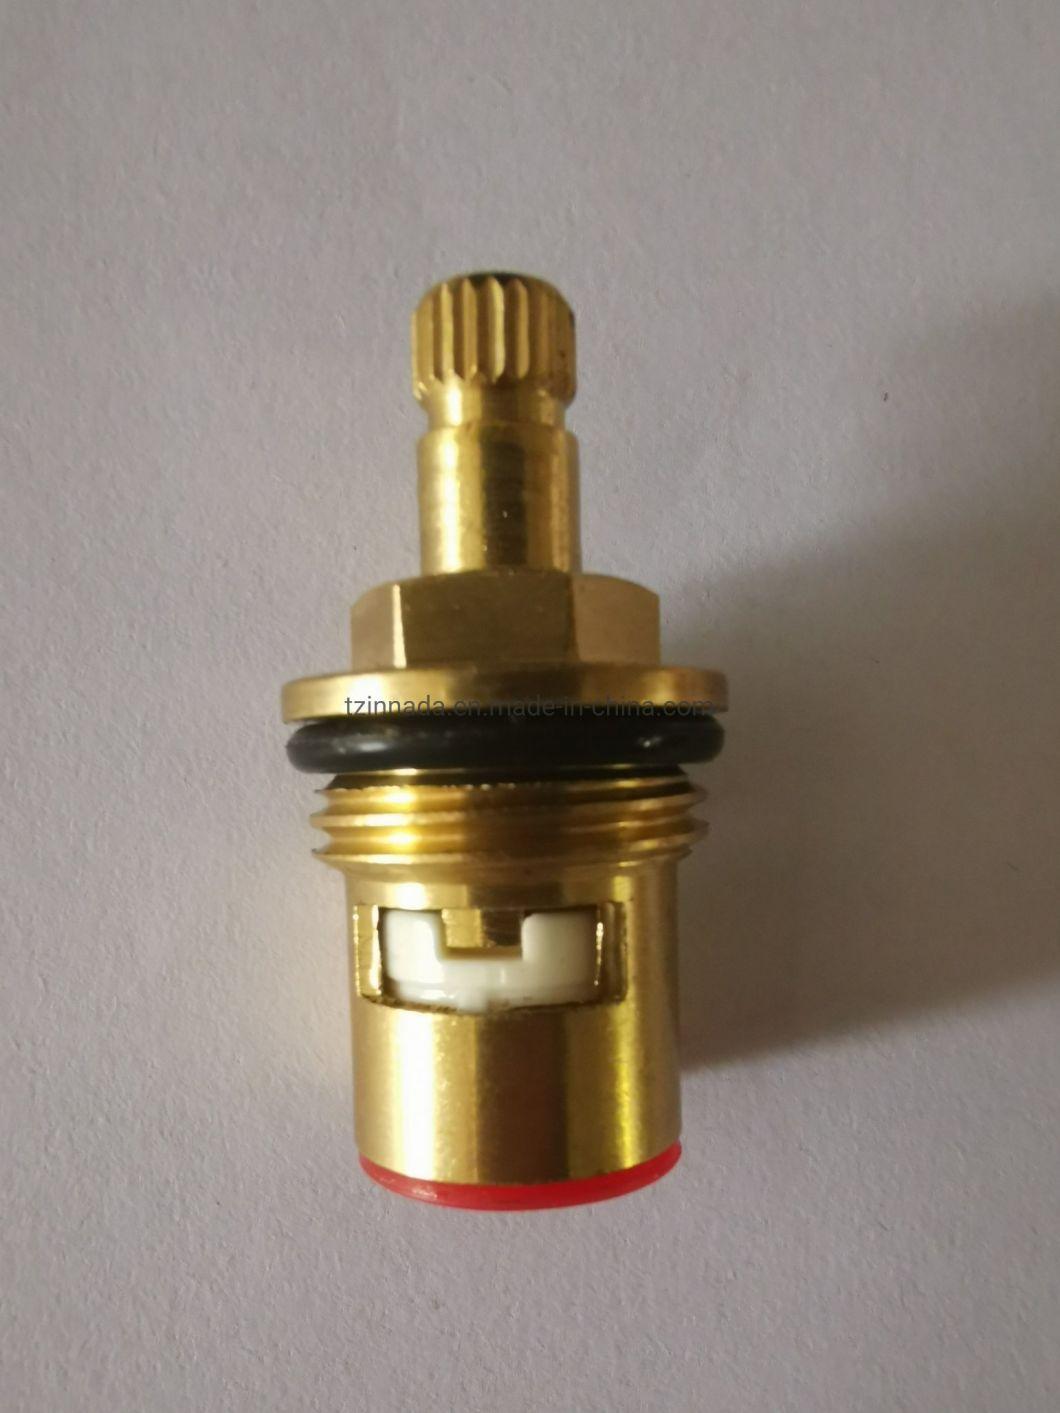 Bathroom Forged Brass Faucet Parts Ceramic Disc Cartridge